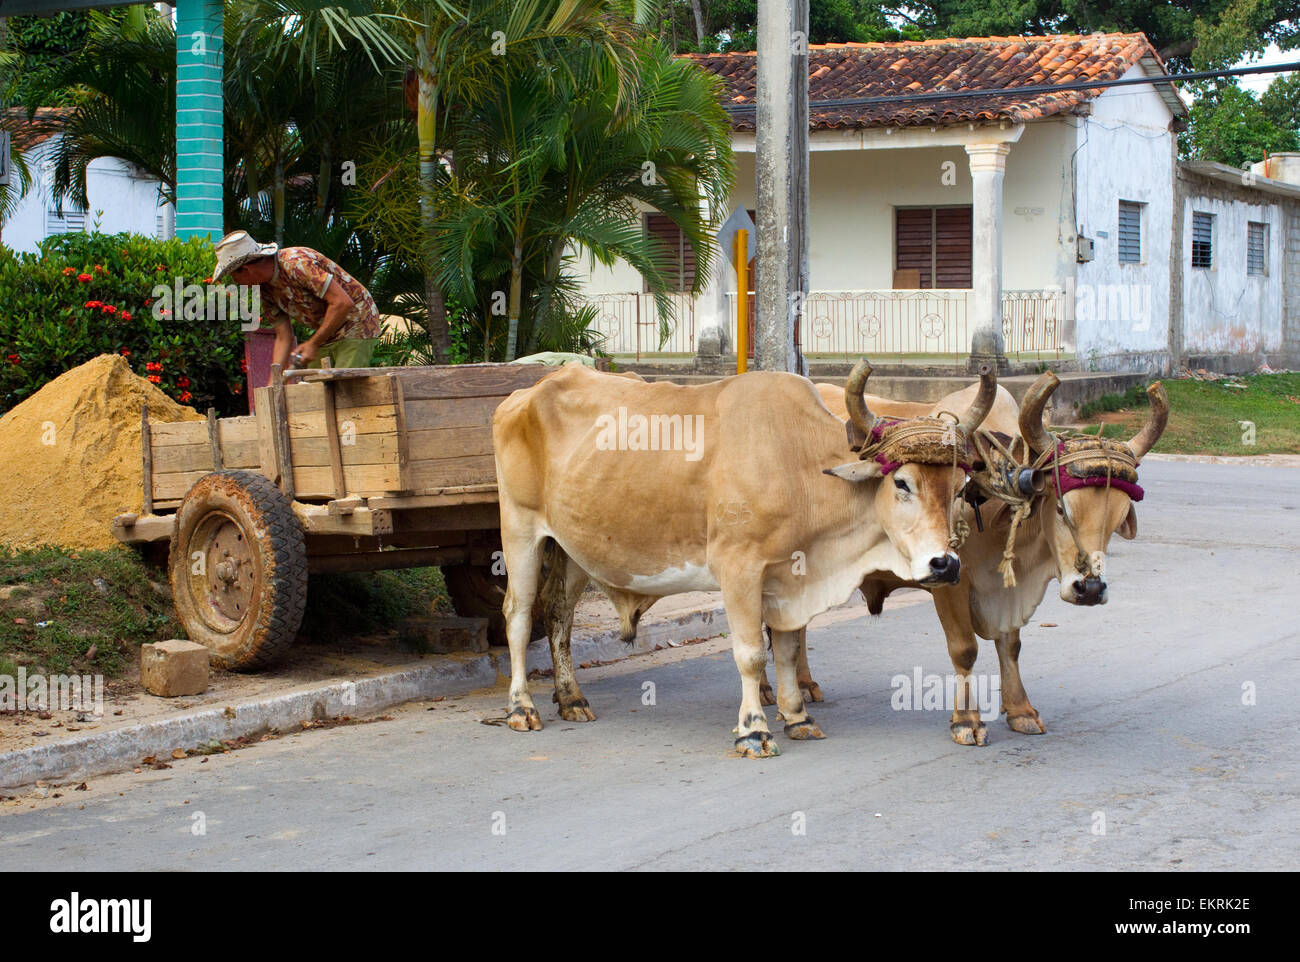 Workman unloading sand from cart pulled by oxen in Vinales,Cuba Stock Photo